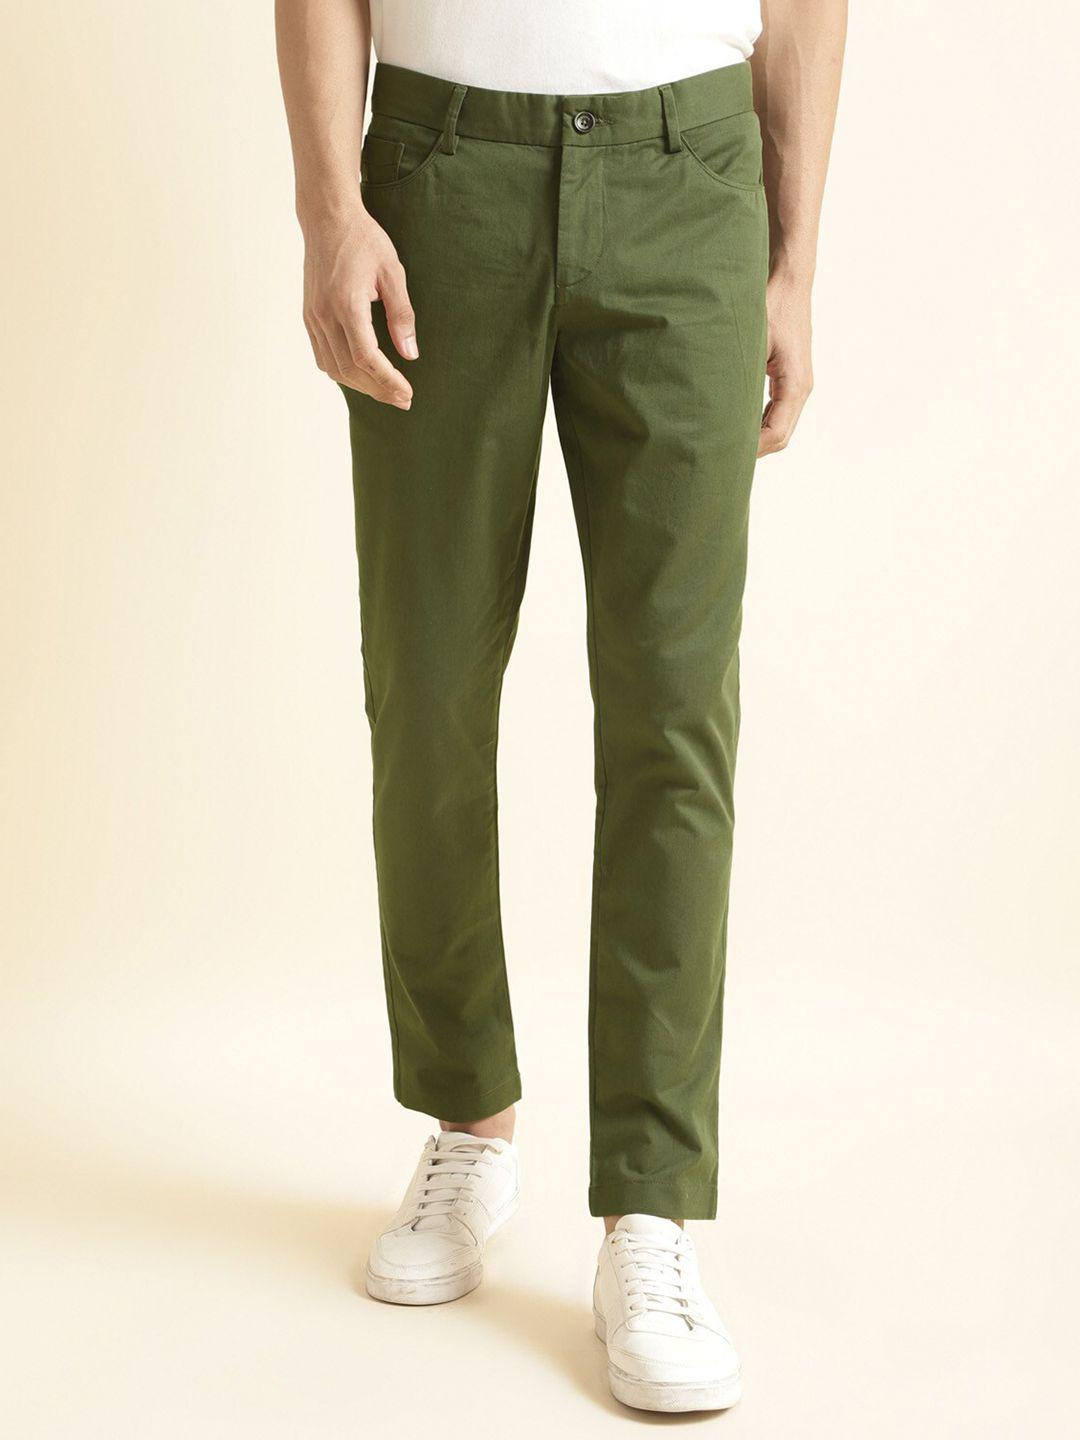 andamen-ultra-men-slim-fit-embroidered-chinos